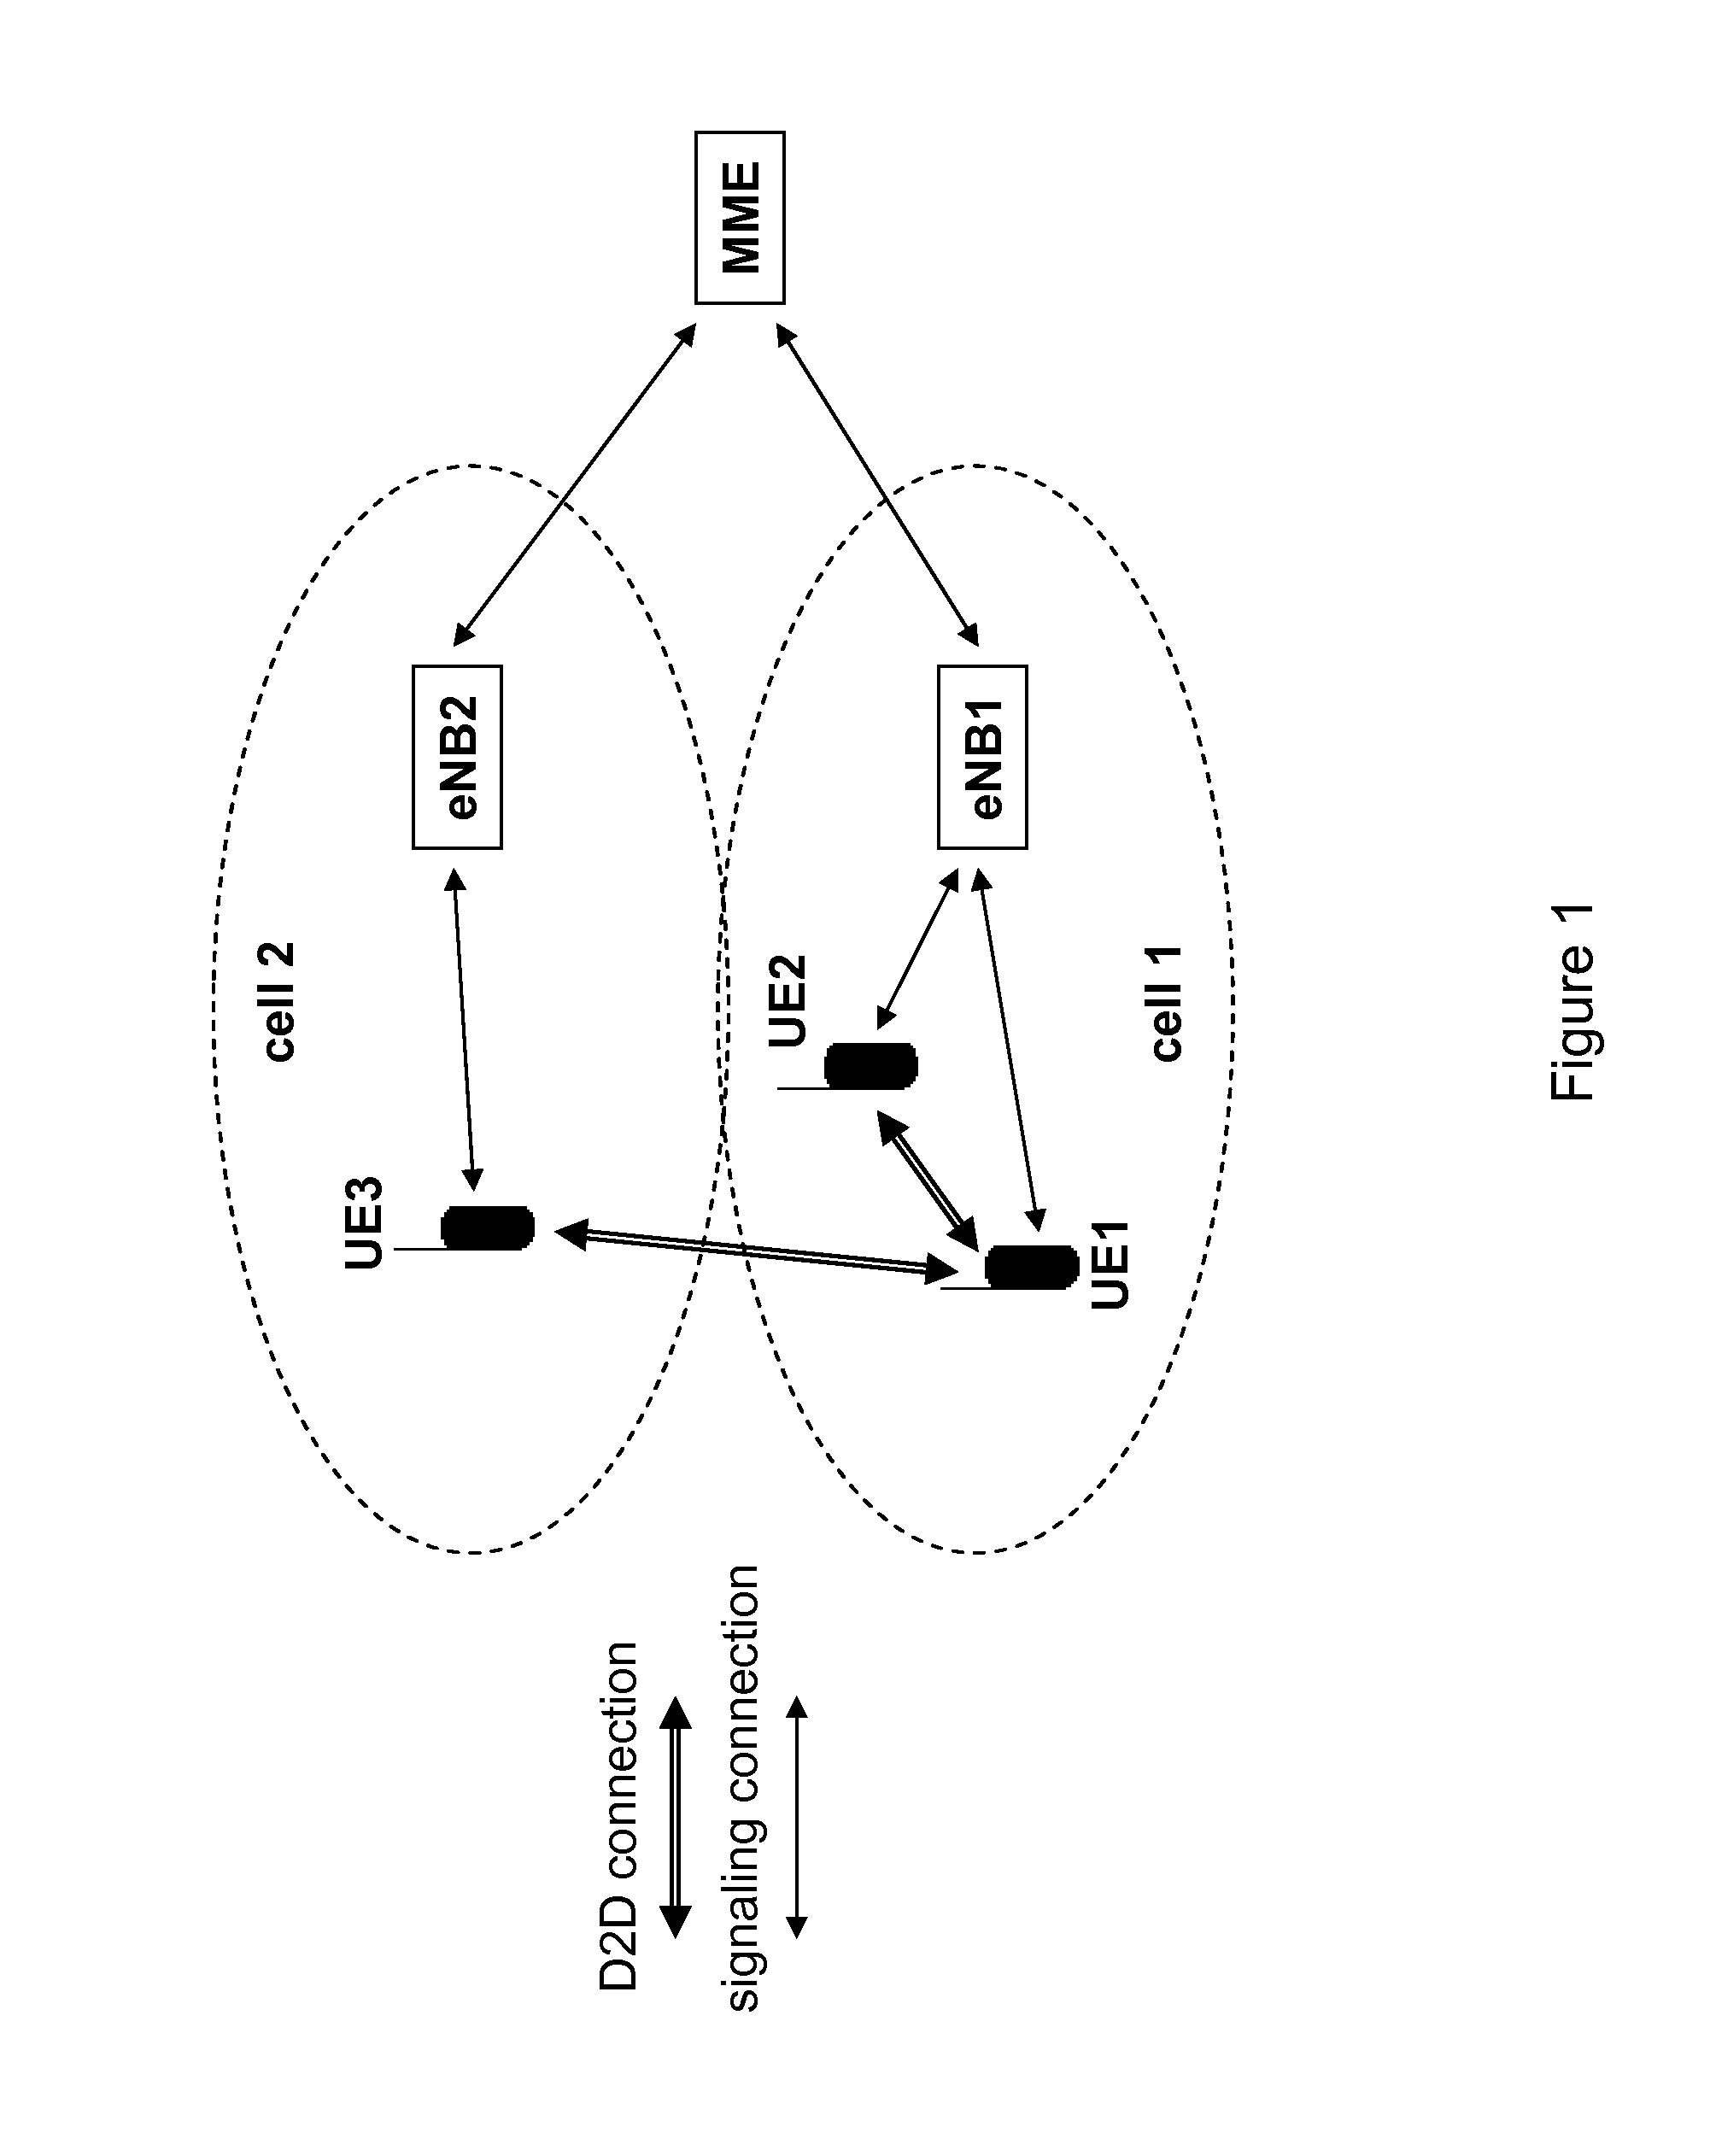 Resource Allocation for Direct Terminal-to-Terminal Communication in a Cellular System